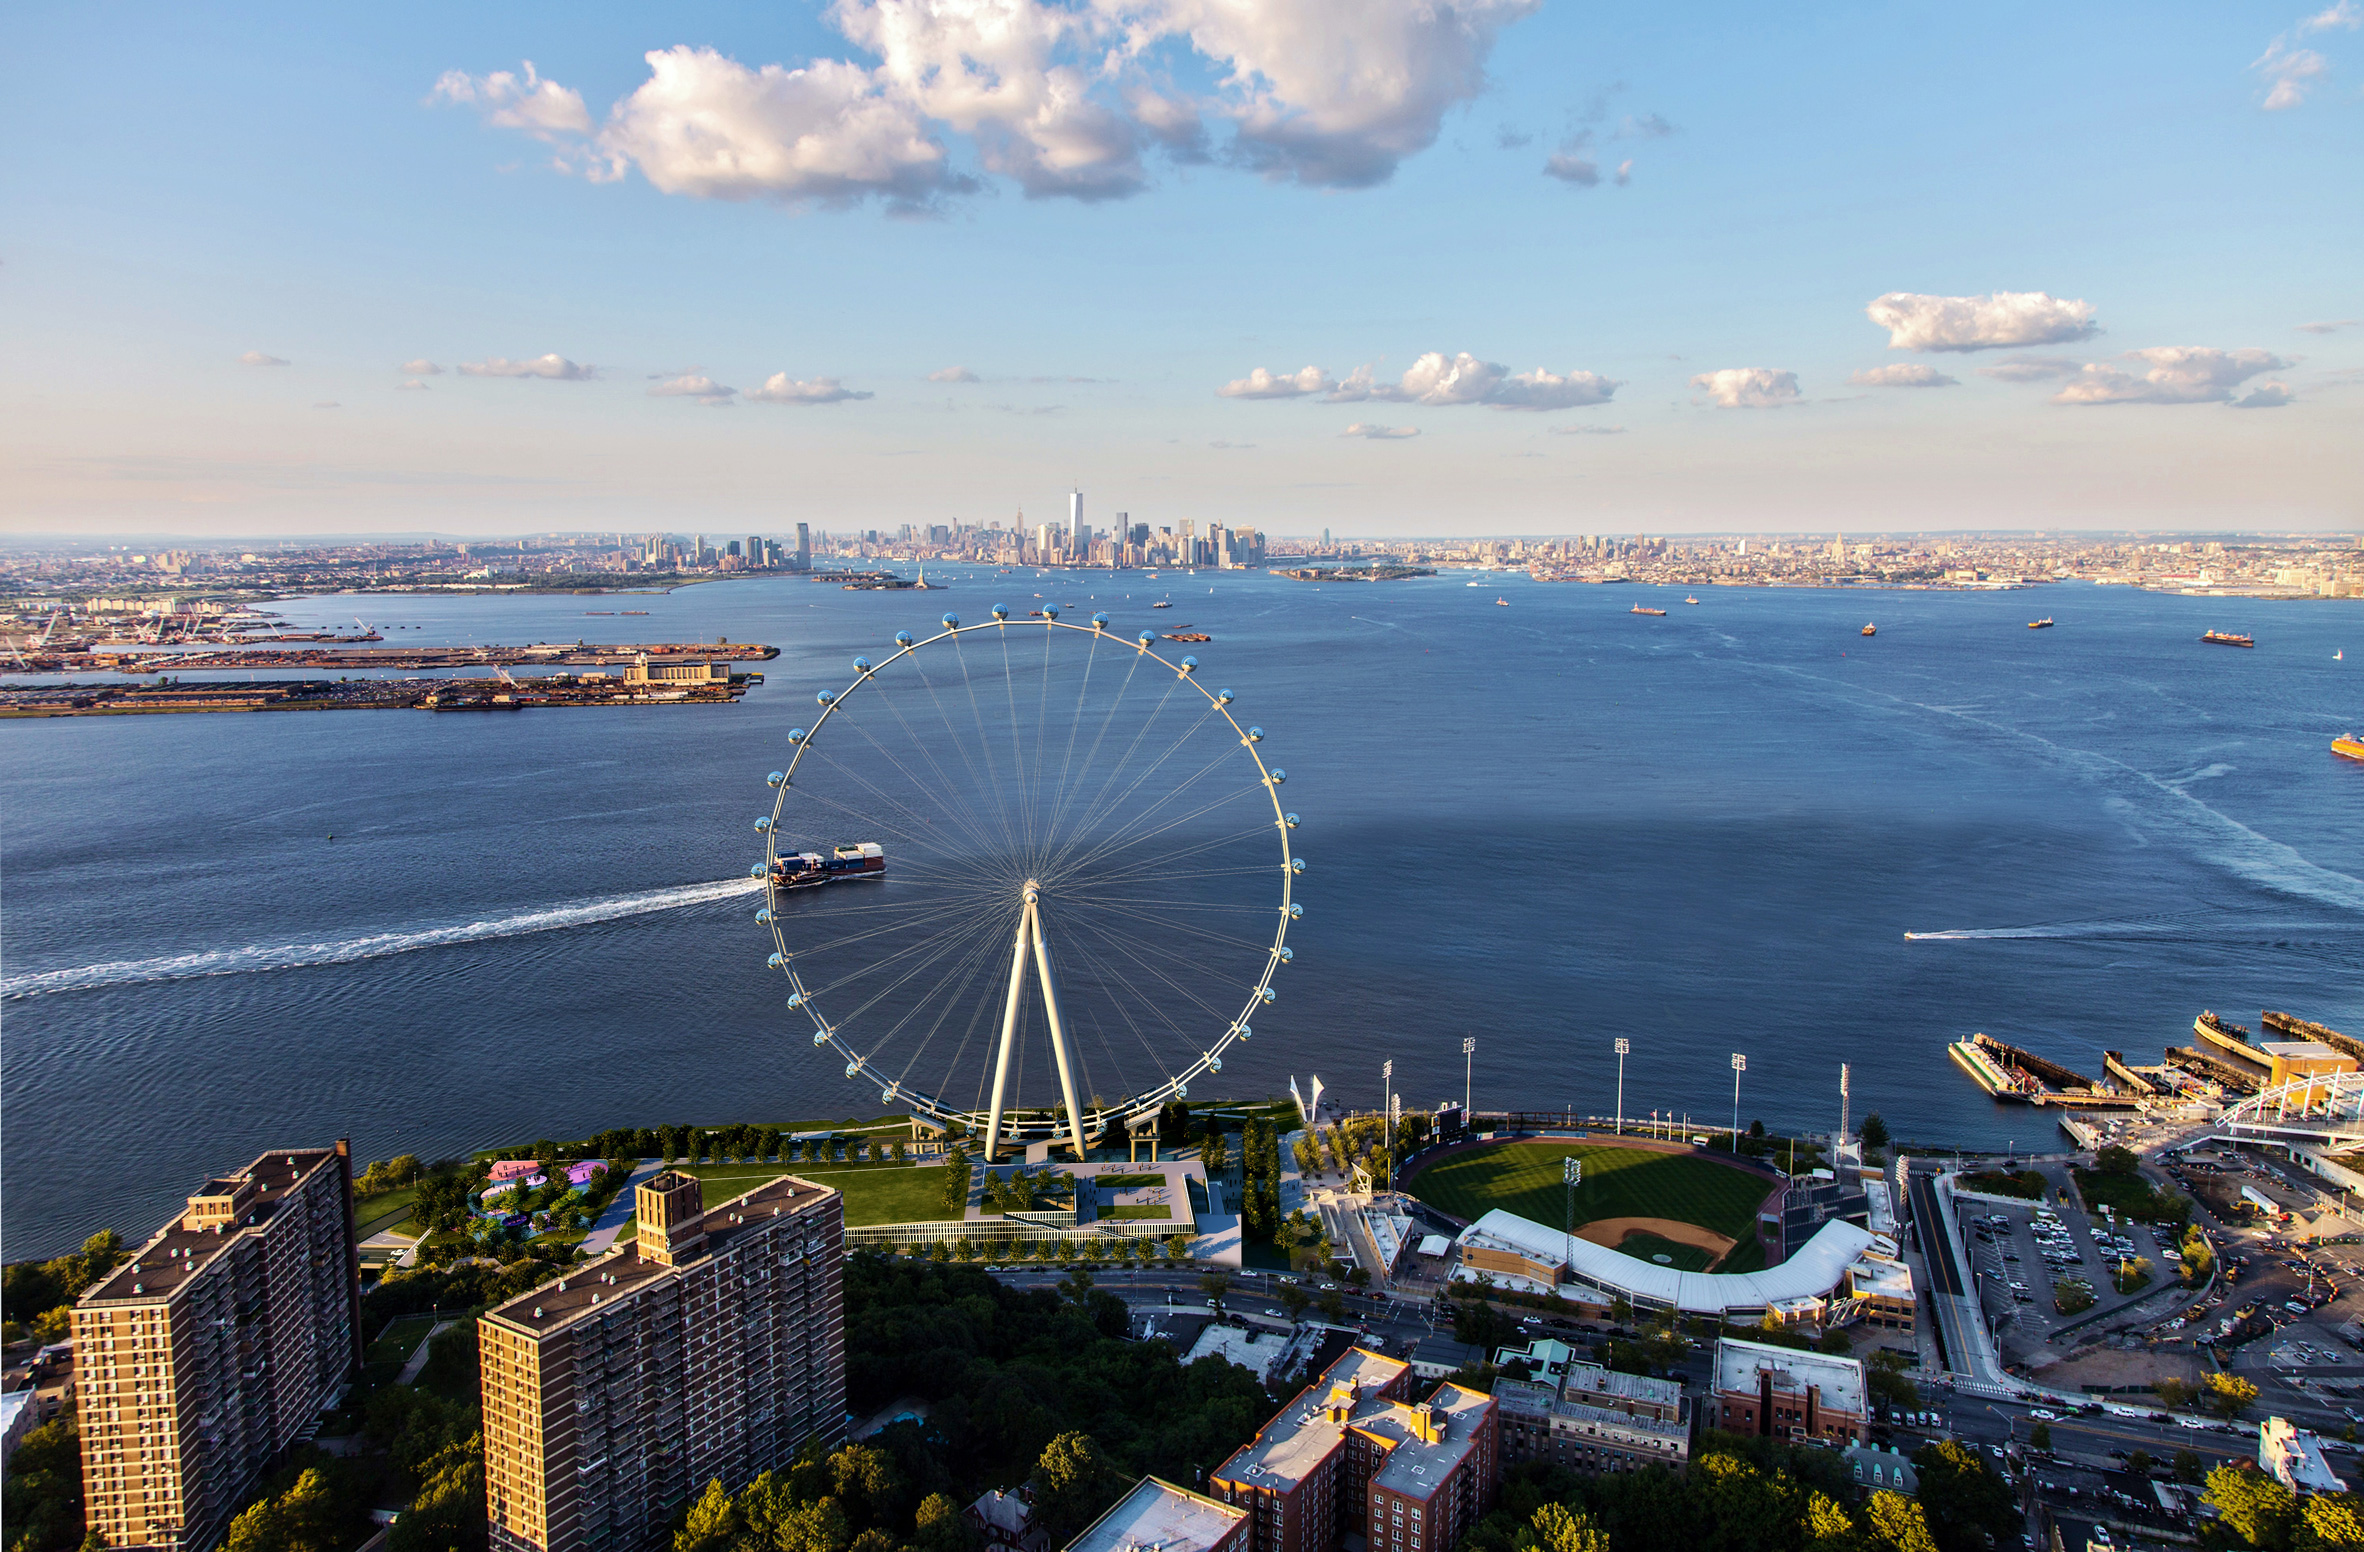 New York Wheel by Perkins Eastman and S9 Architecture